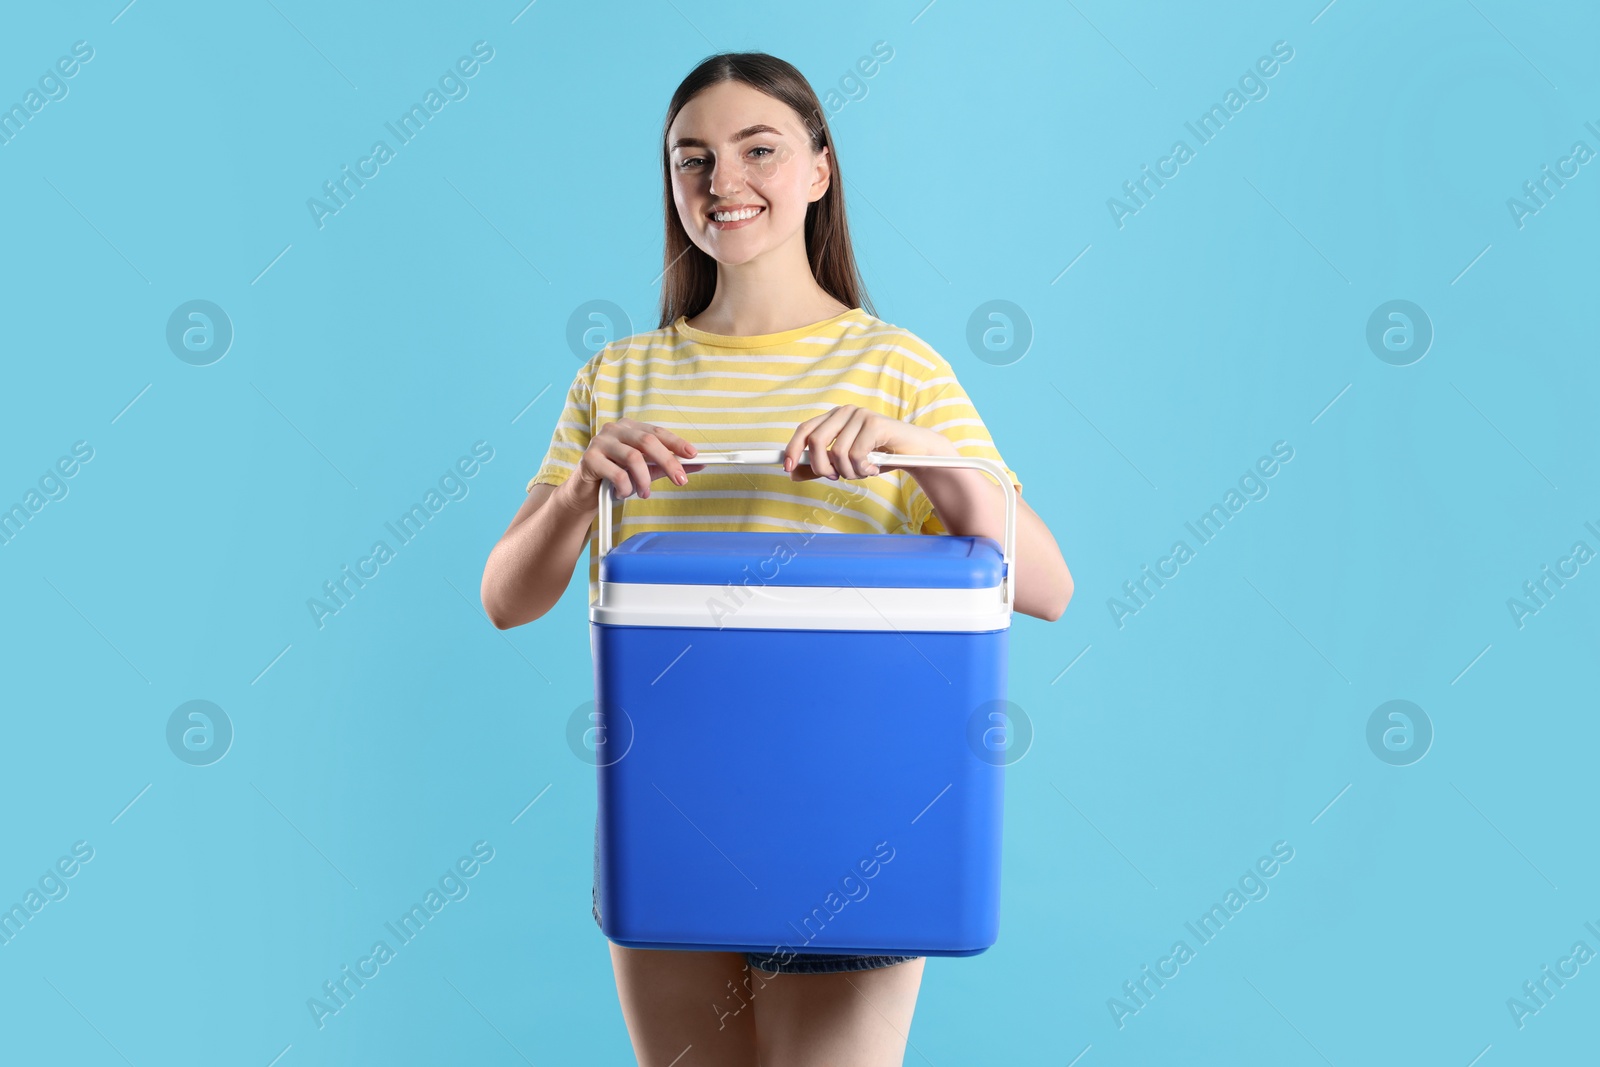 Photo of Happy young woman with plastic cool box on light blue background